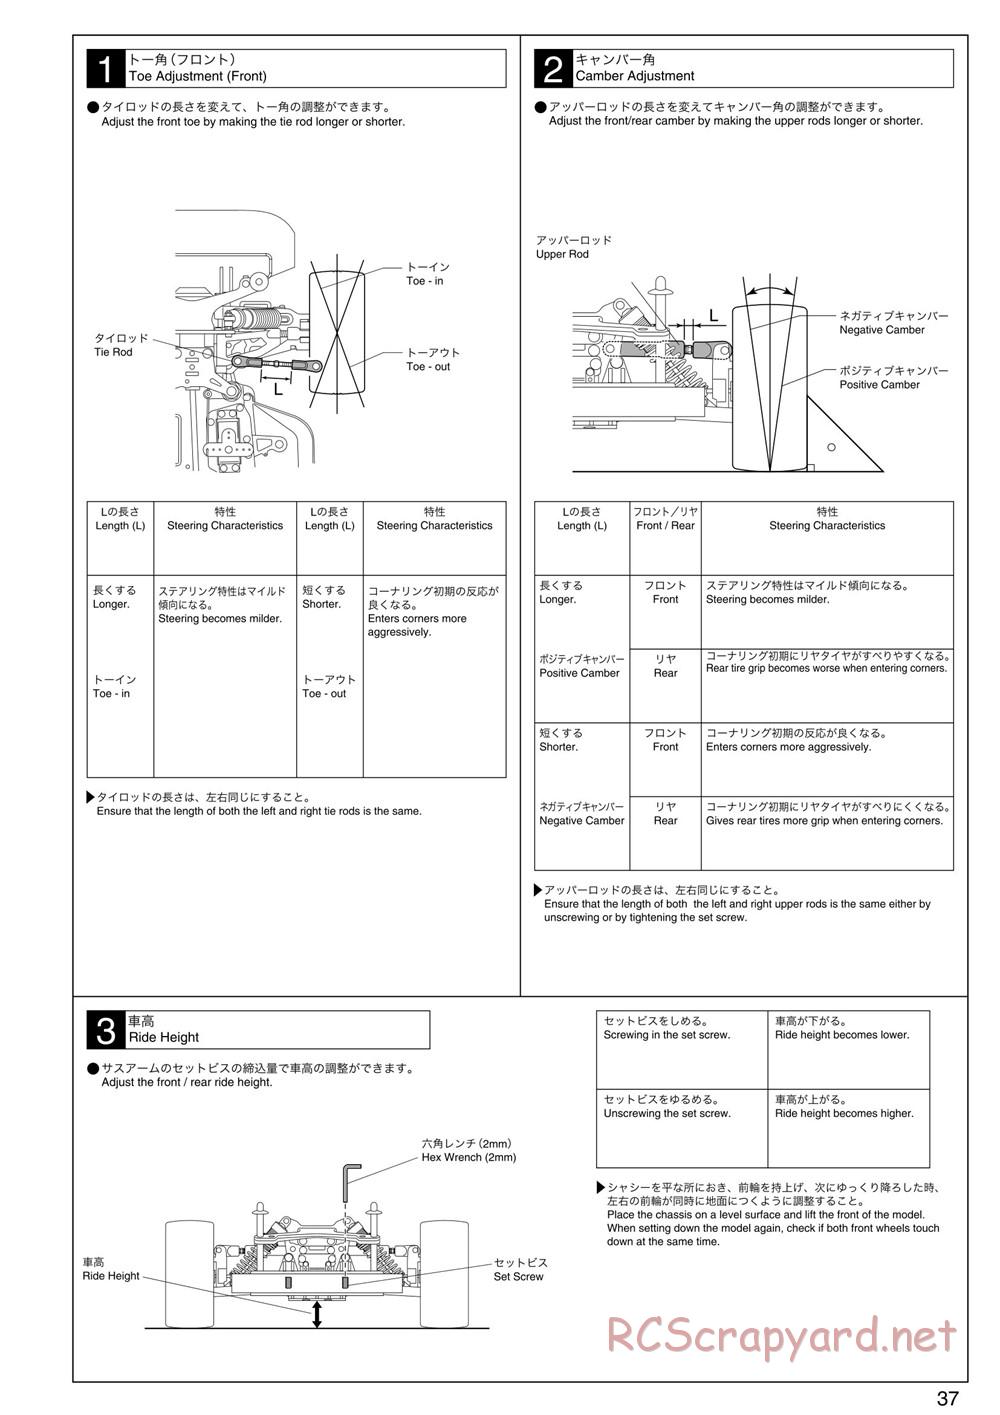 Kyosho - Inferno GT2 - Manual - Page 37